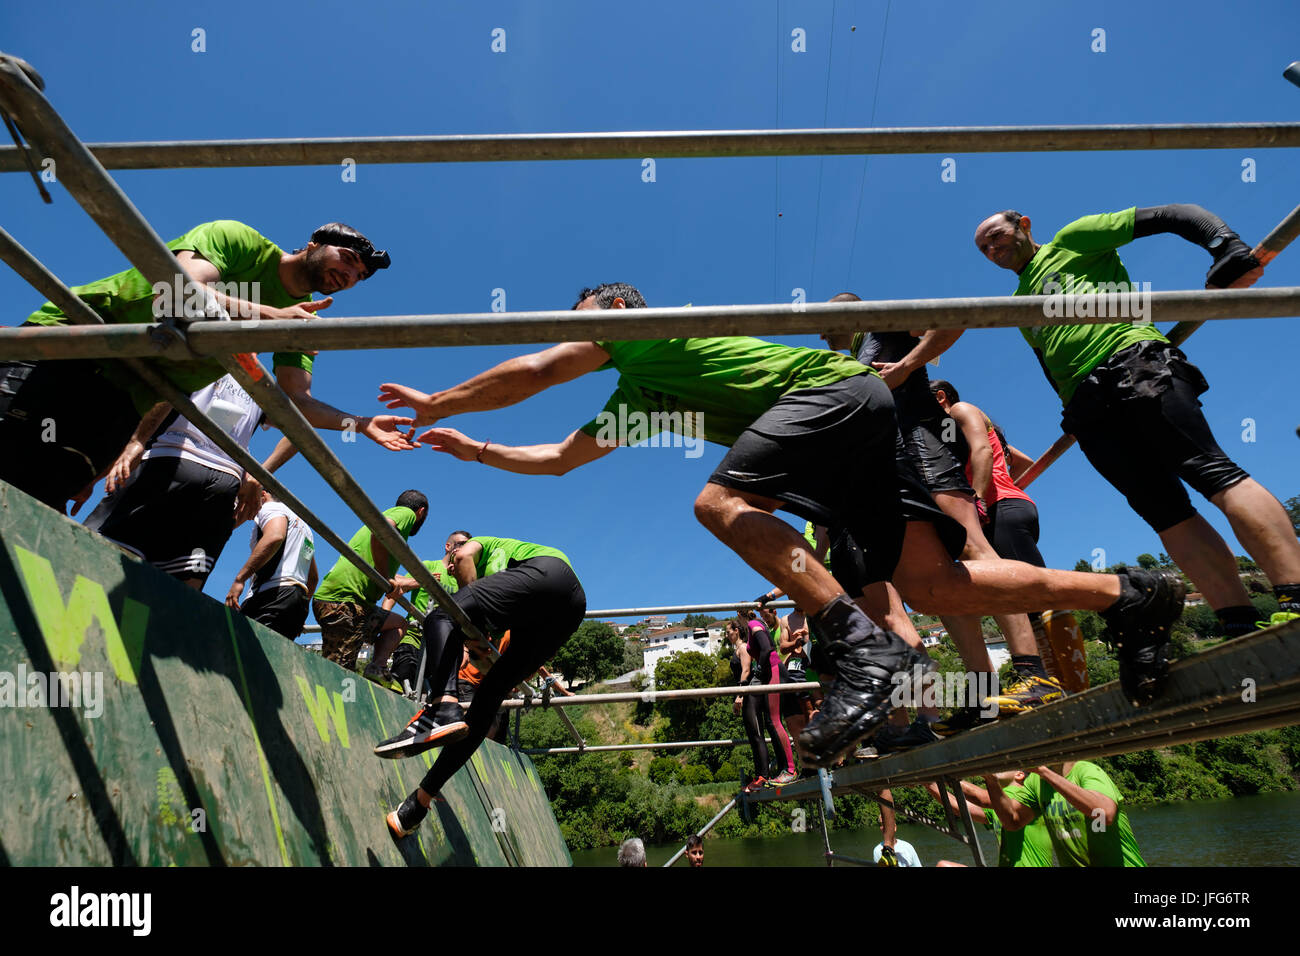 Athletes participating on an obstacle course race Stock Photo